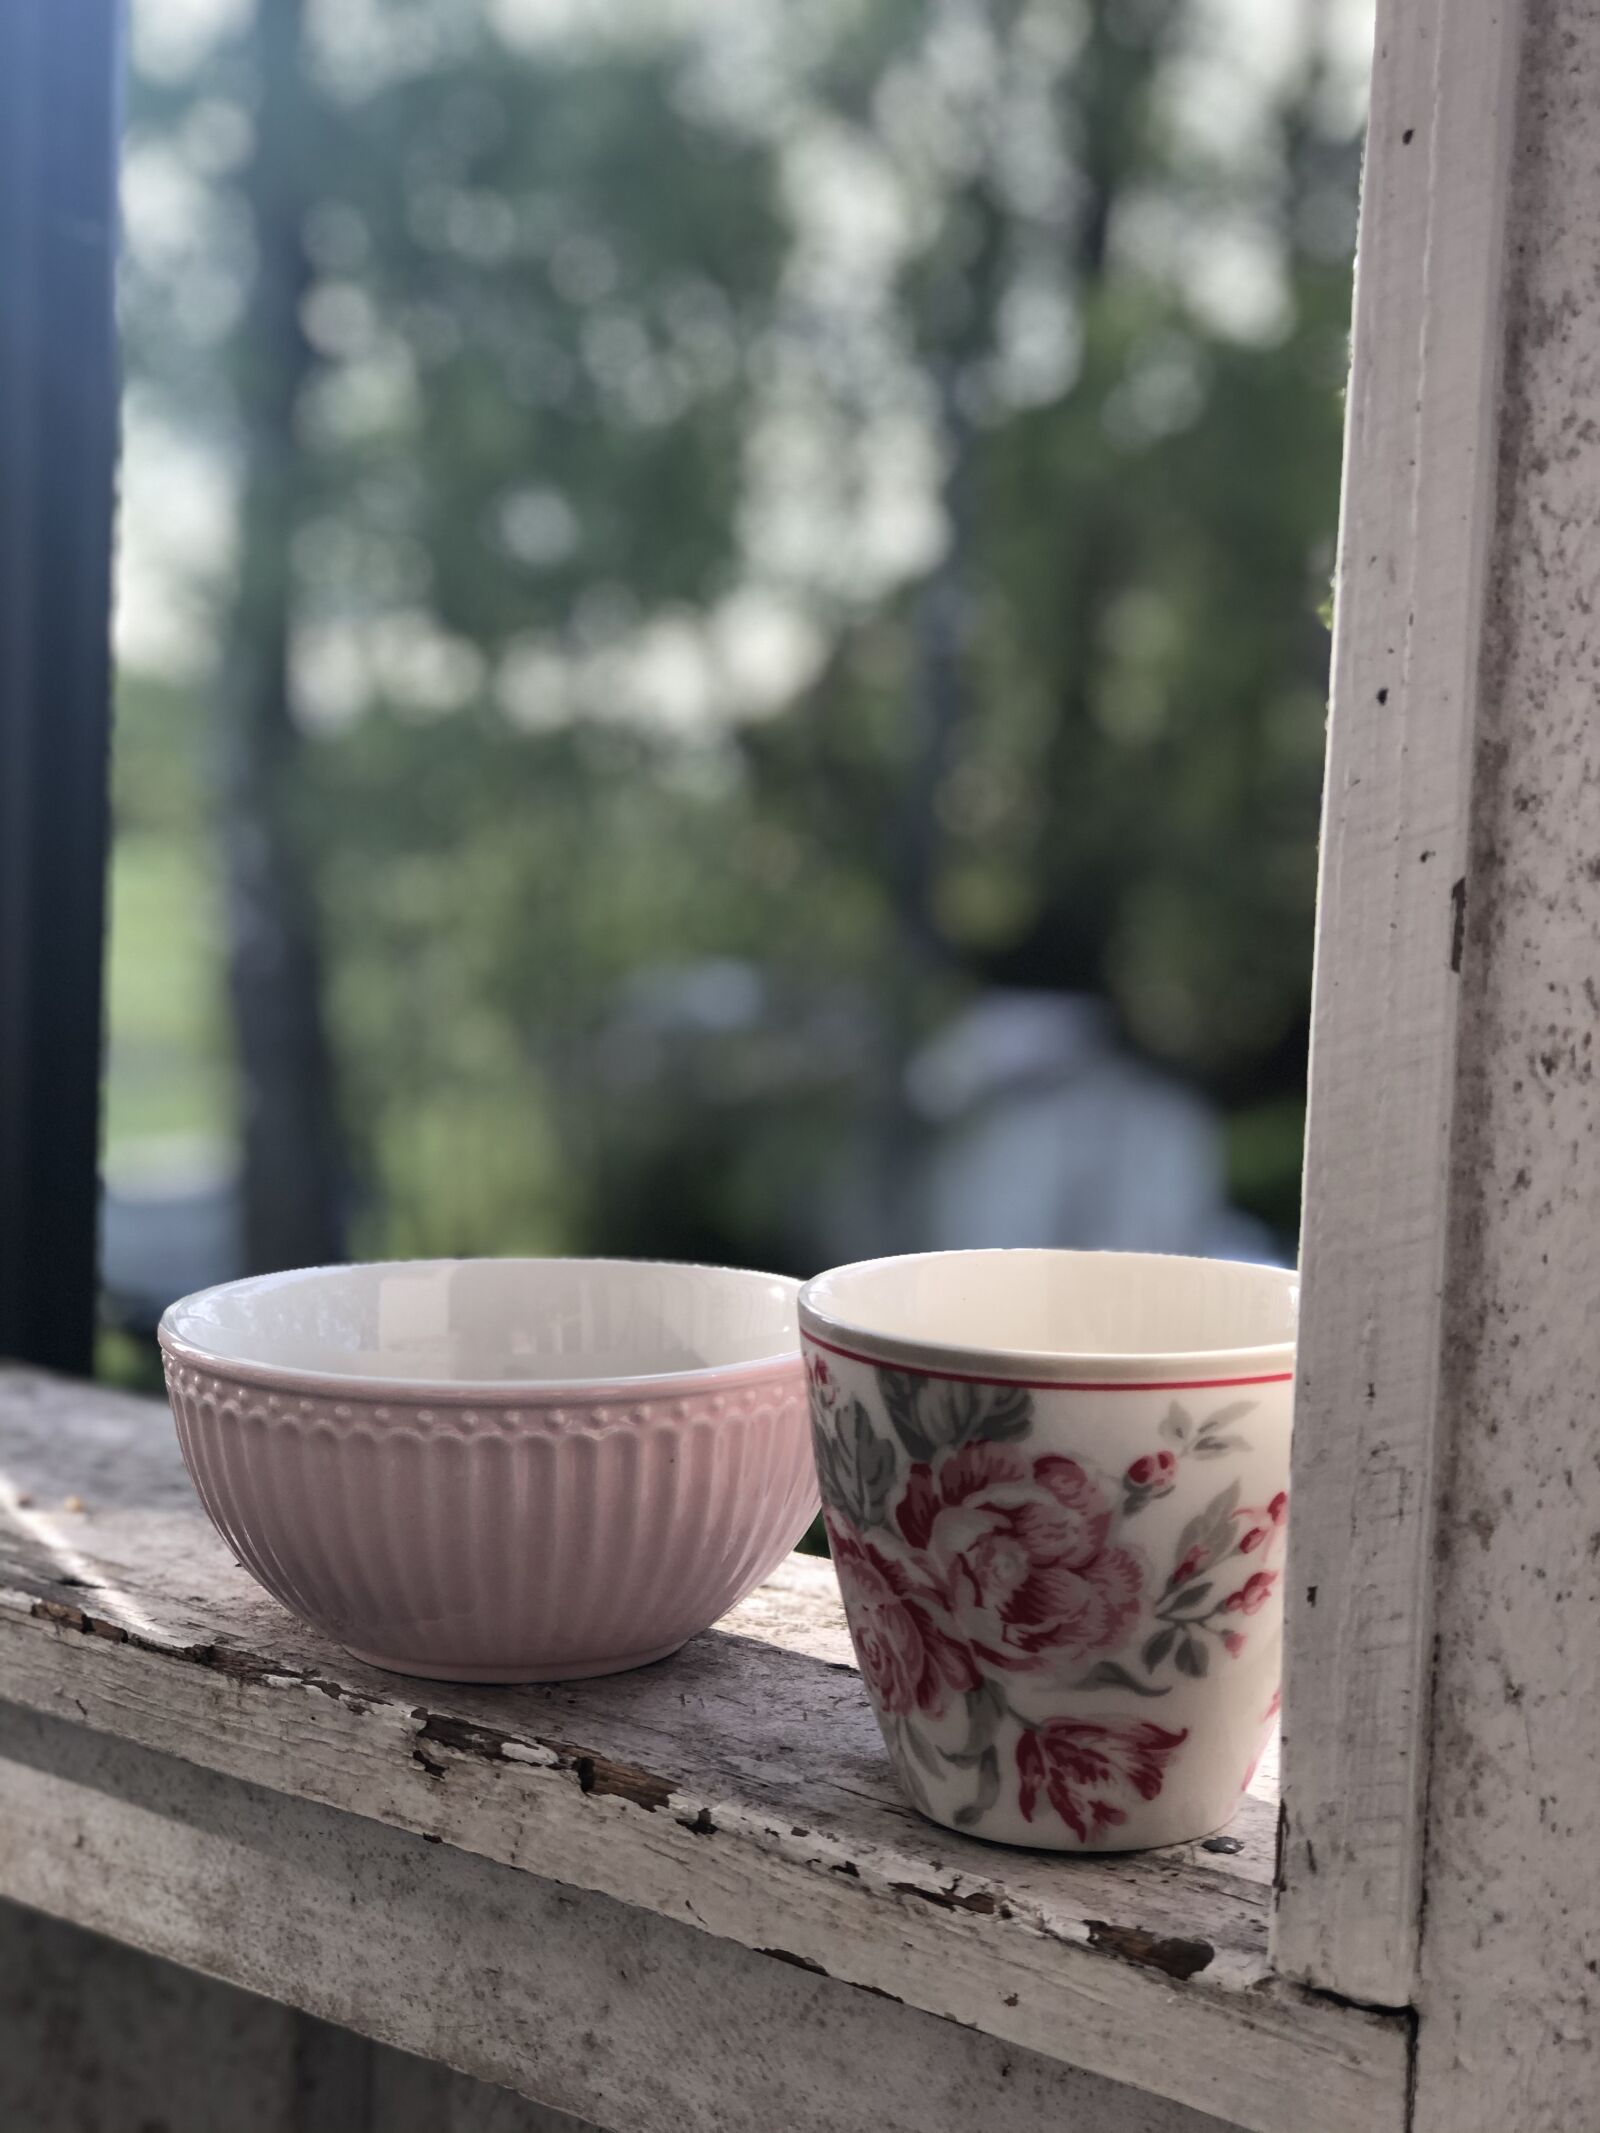 Apple iPhone 8 Plus sample photo. Evening, cup, ro photography